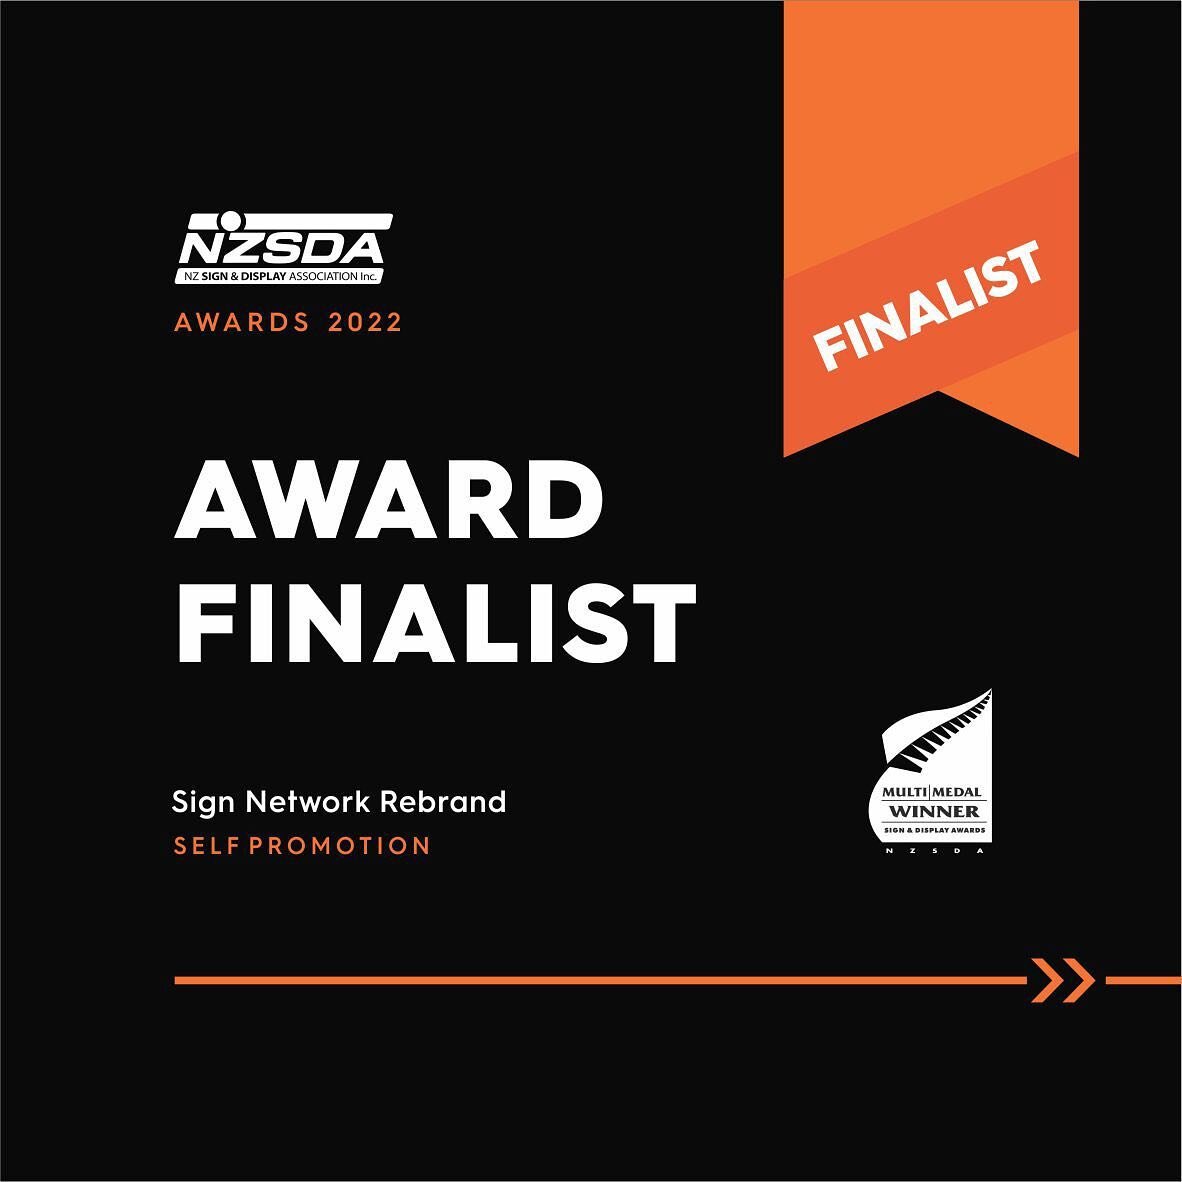 Our second &ldquo;Finalist&rdquo; nomination in the Self-Promotion category at this years NZSDA Awards was for the work we put into our REBRAND!

This entry shows multiple disciplines really highlighting the thinking and design behind our newly imagi